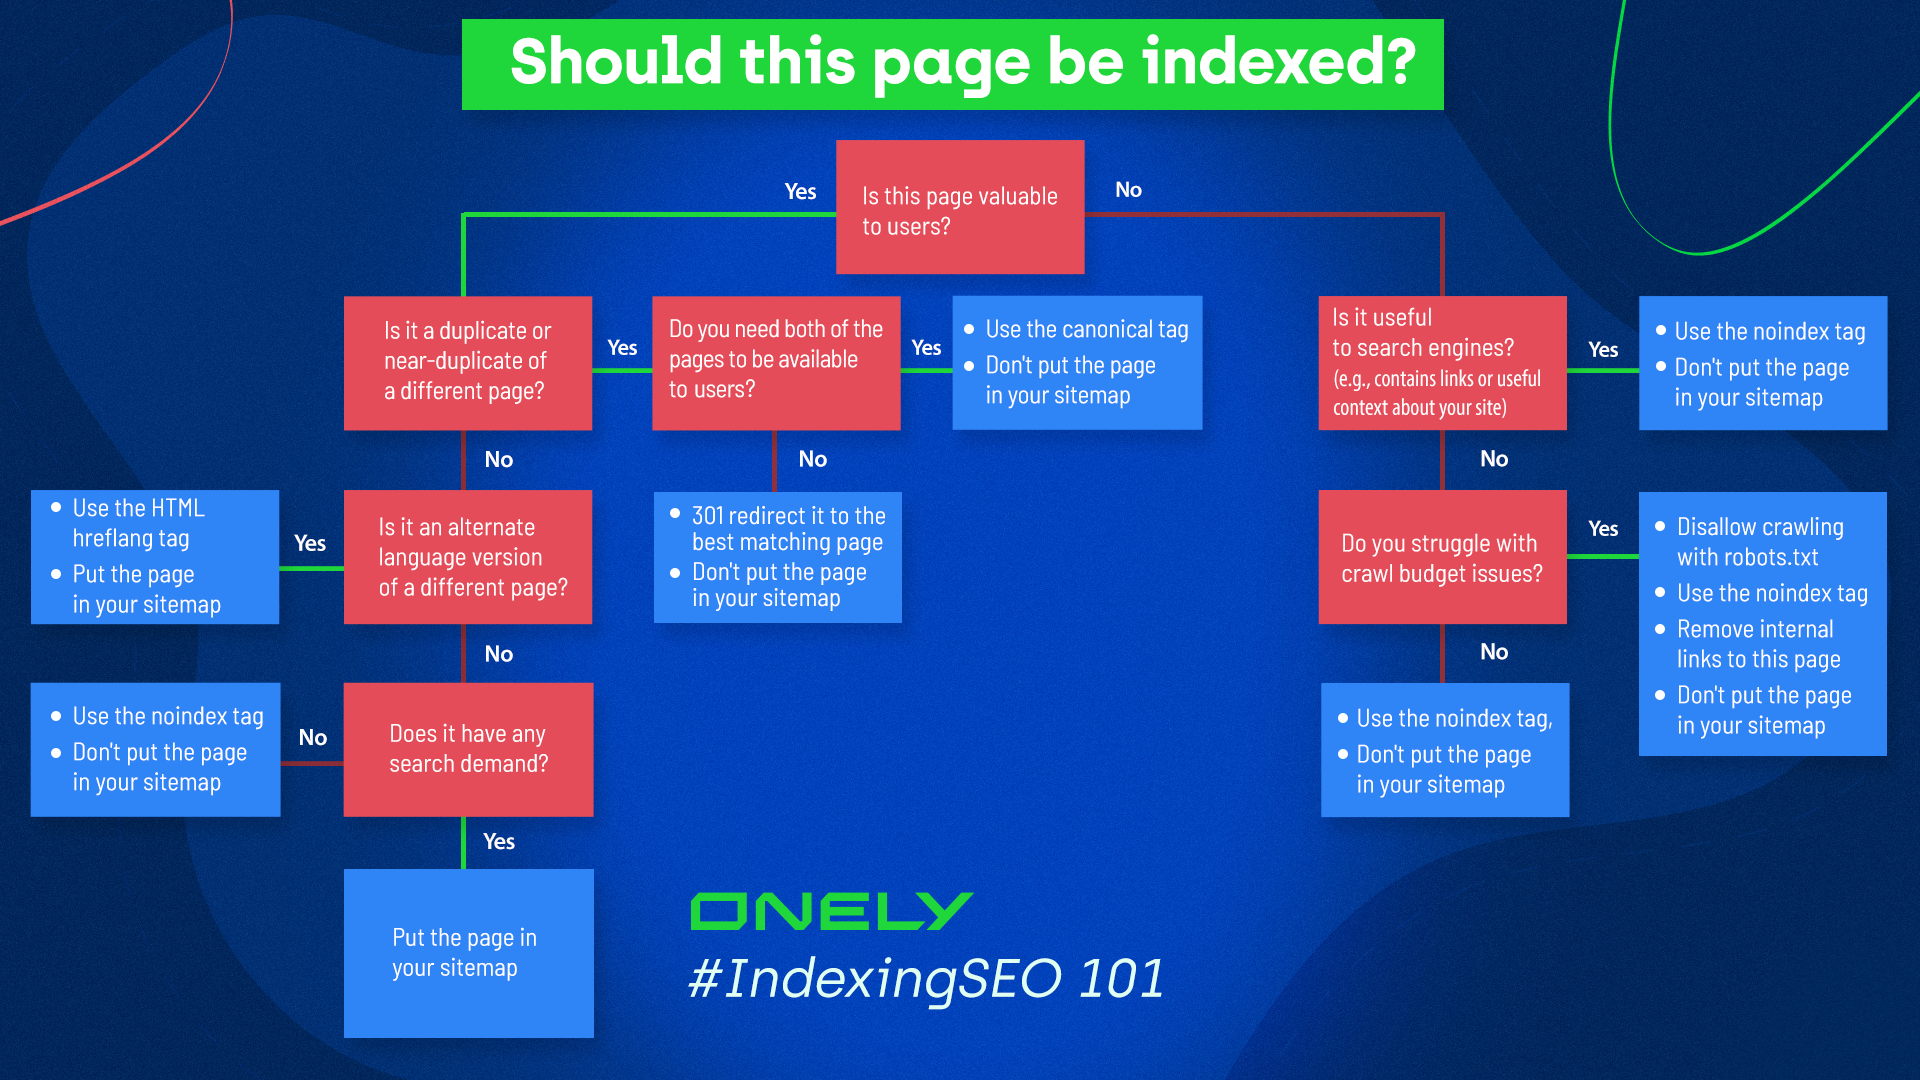 decision tree with a title "should this page be indexed"